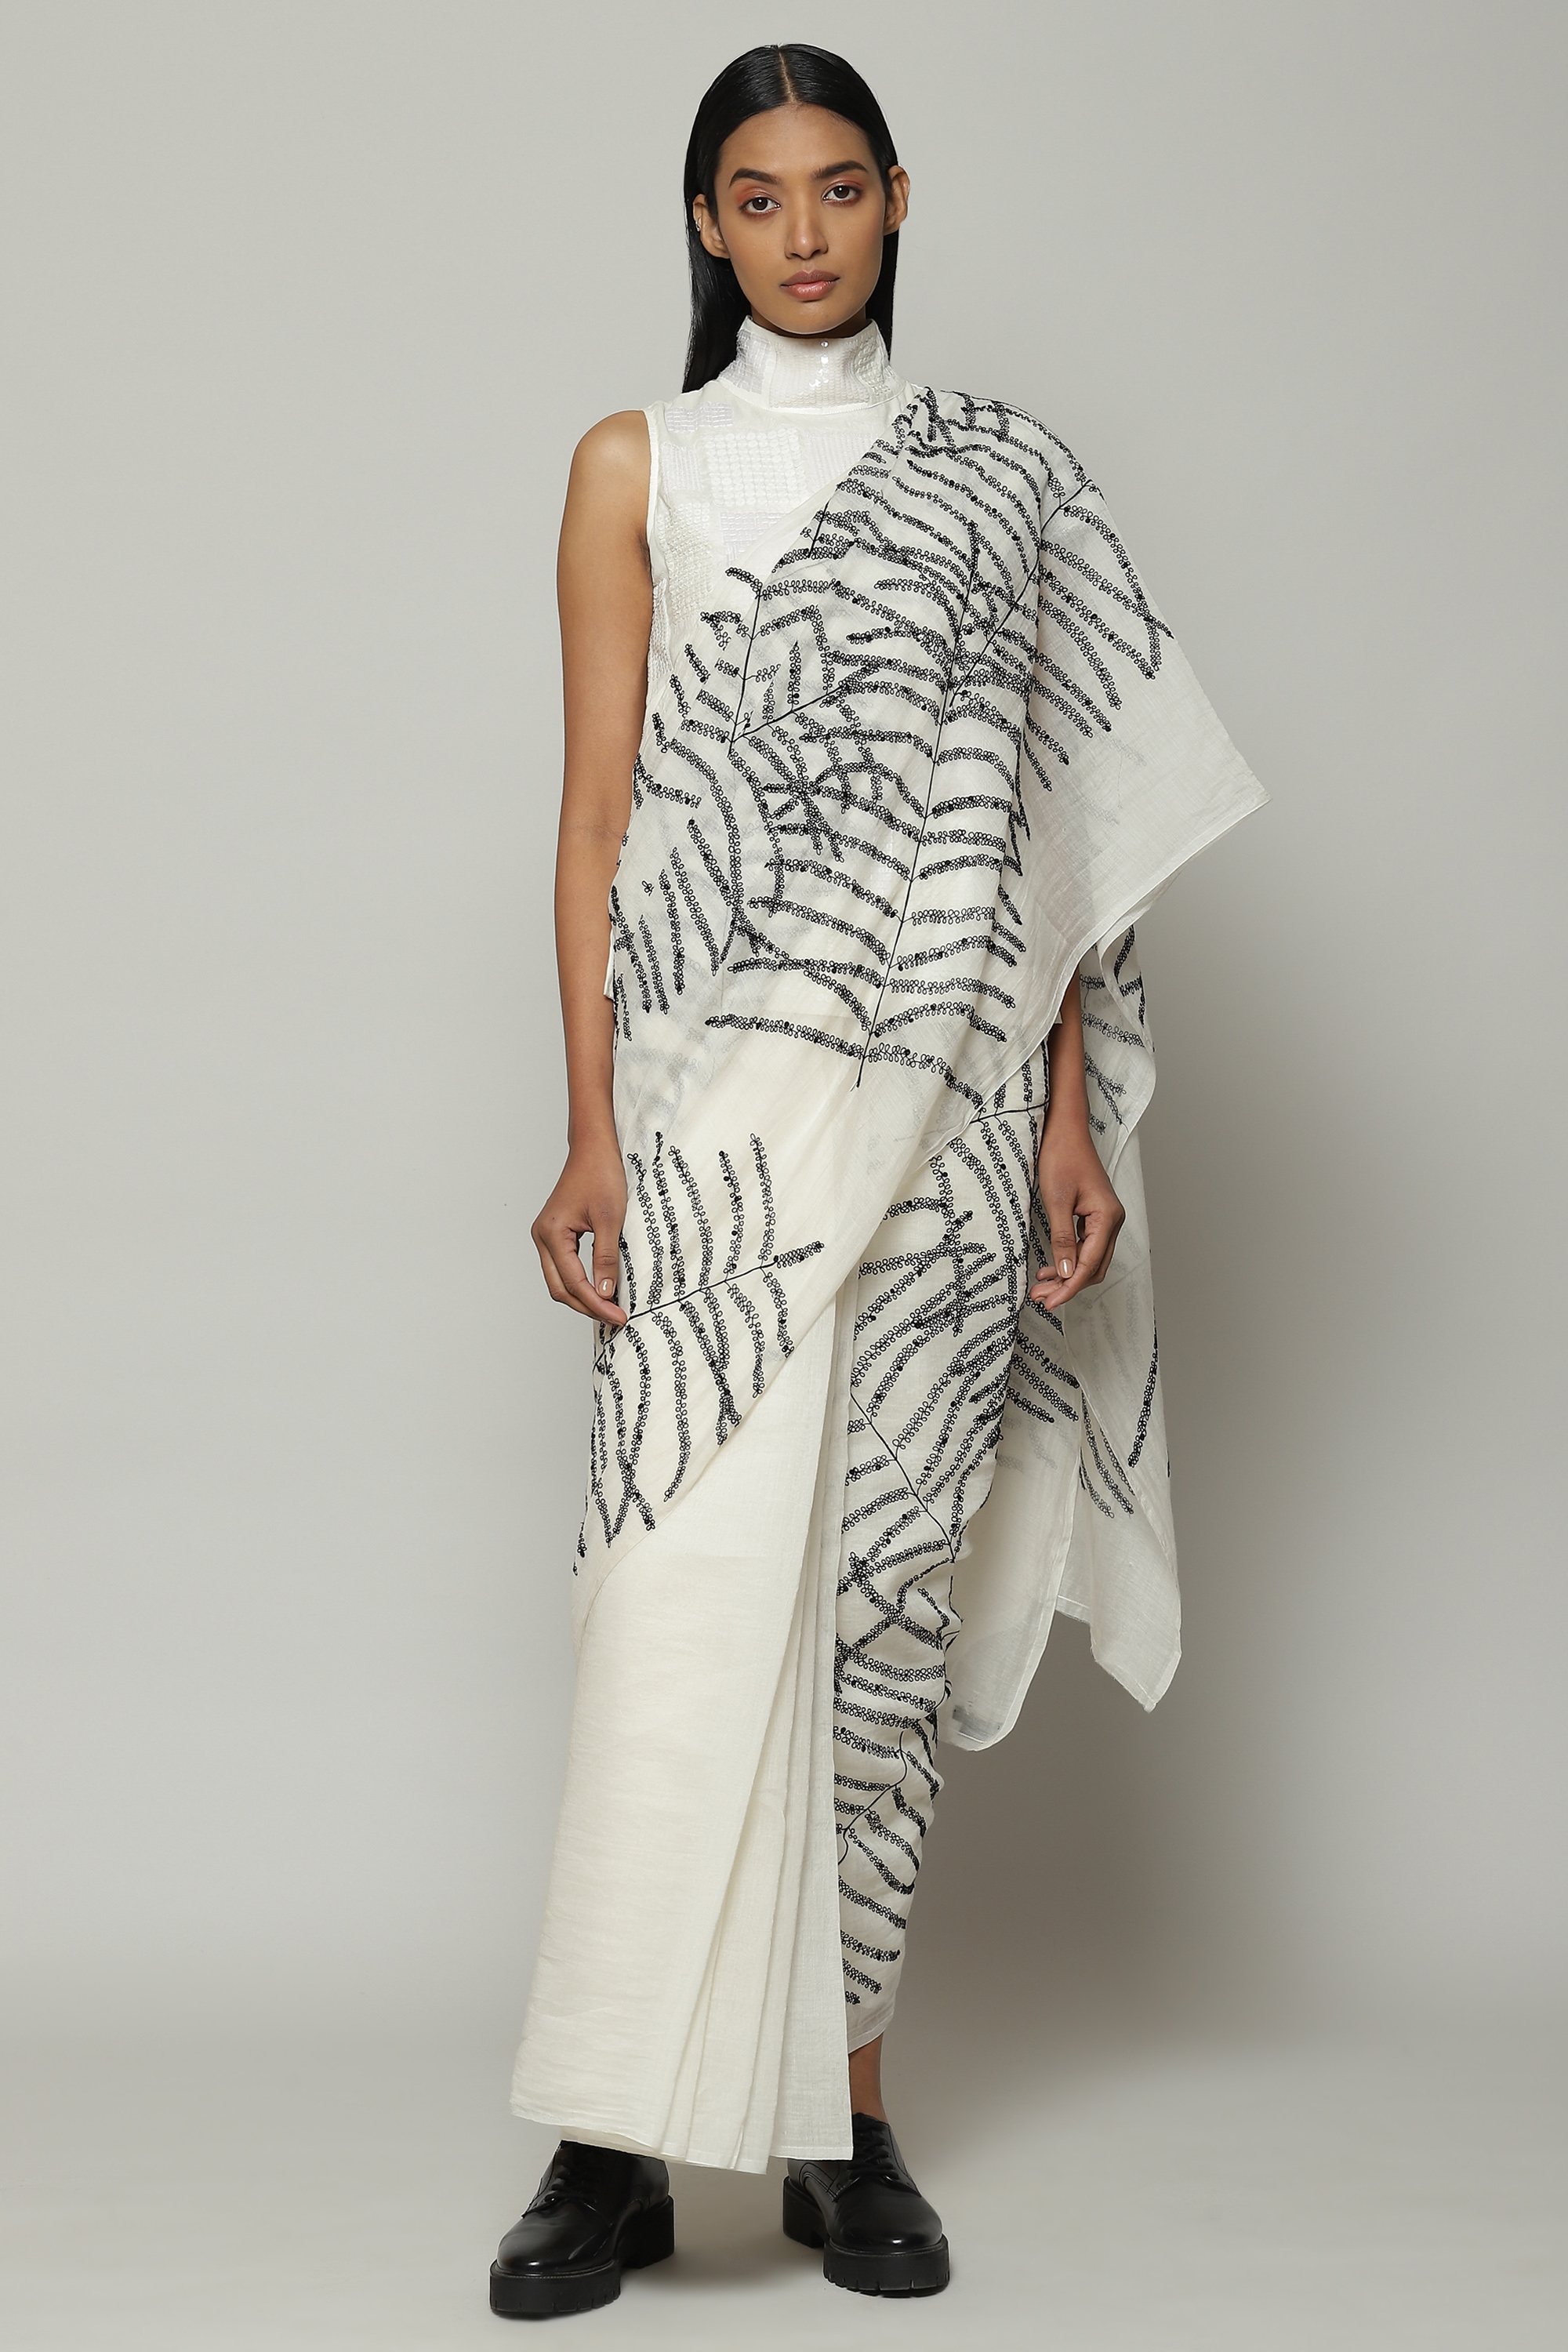 ABRAHAM AND THAKORE | Fern Crewel Embroidered Single Ply Saree